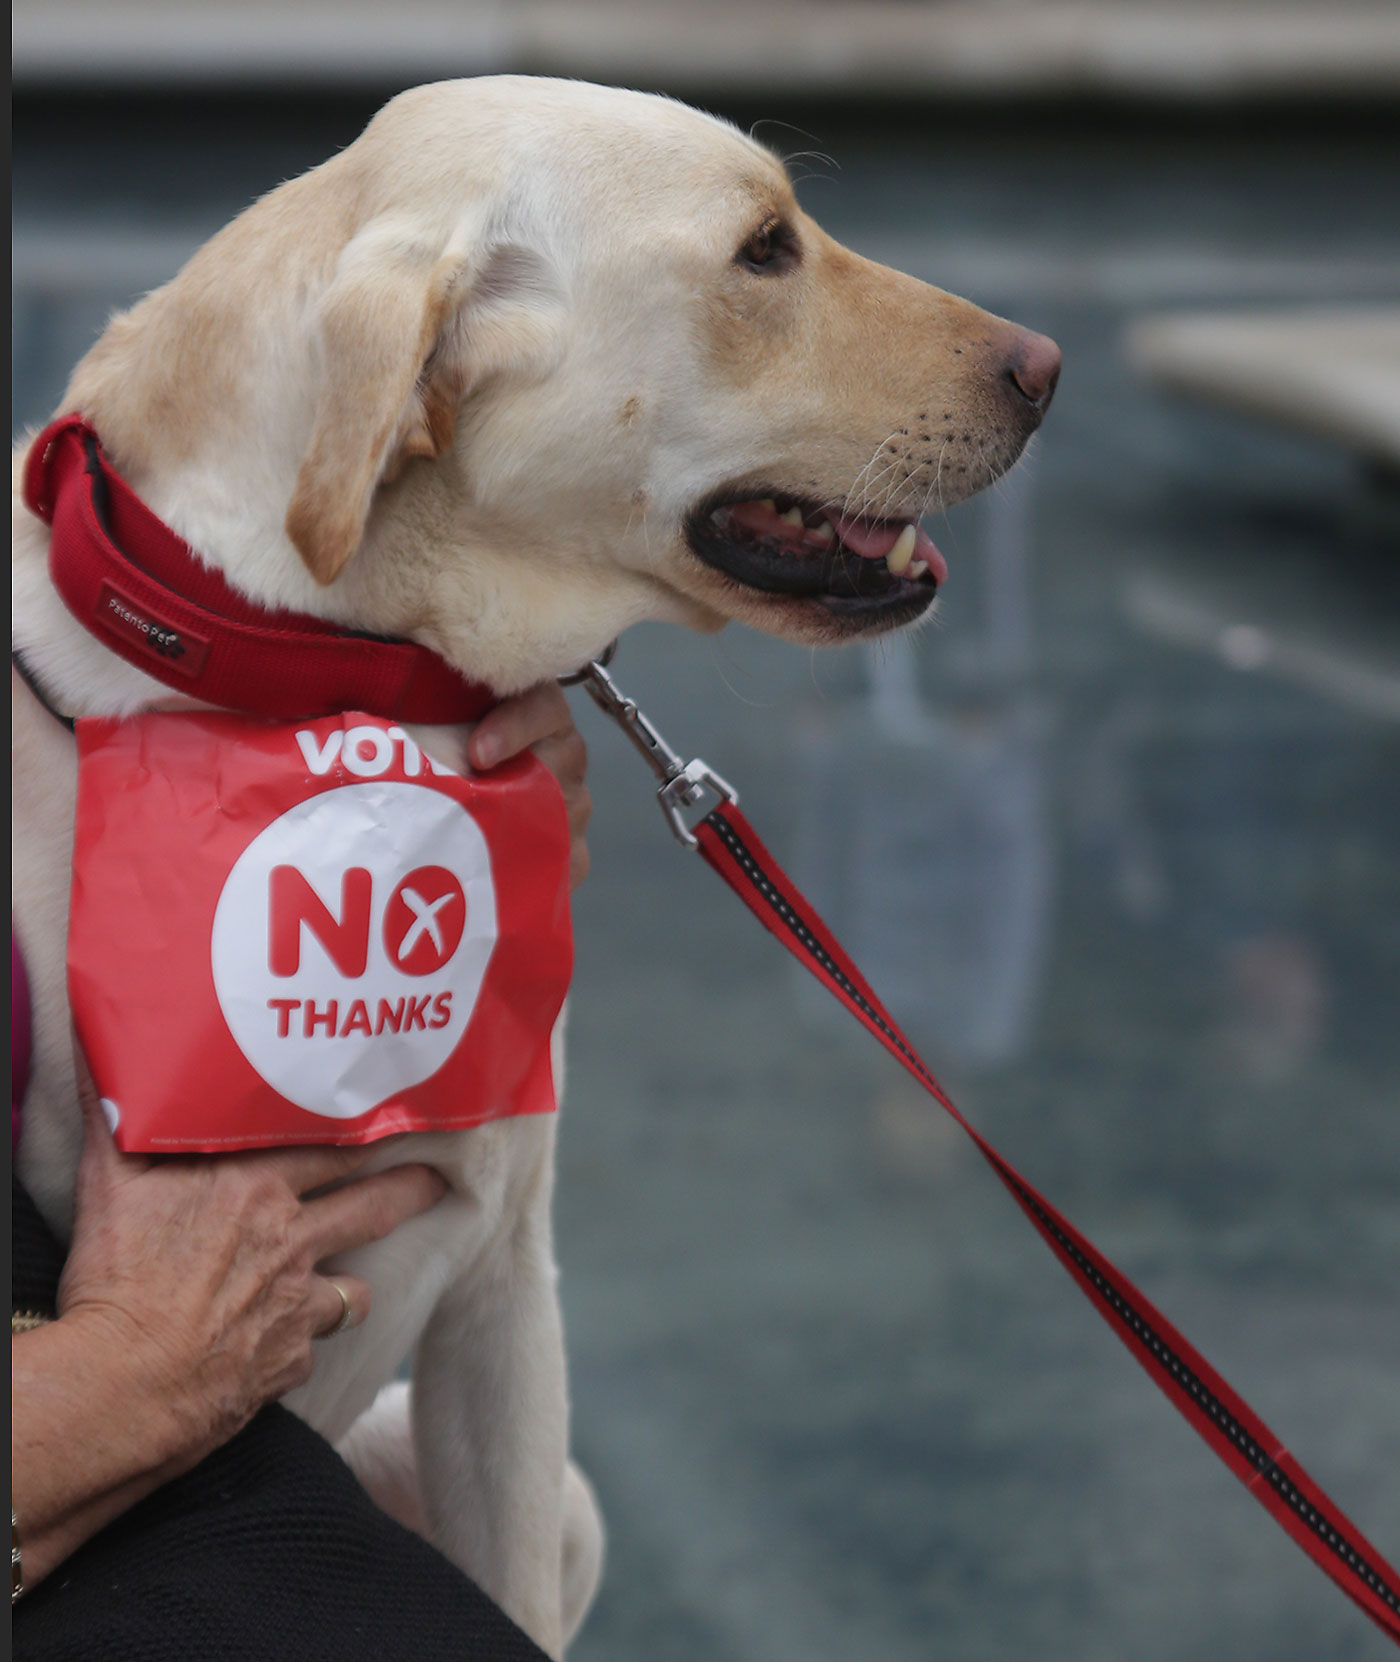 Photos taken in Edinburgh on voting day in the  Scottish Indepemdence Referendum on 18 September 2014  -  Outside the Scottish Parliament  -  A Silent 'No' Supporter